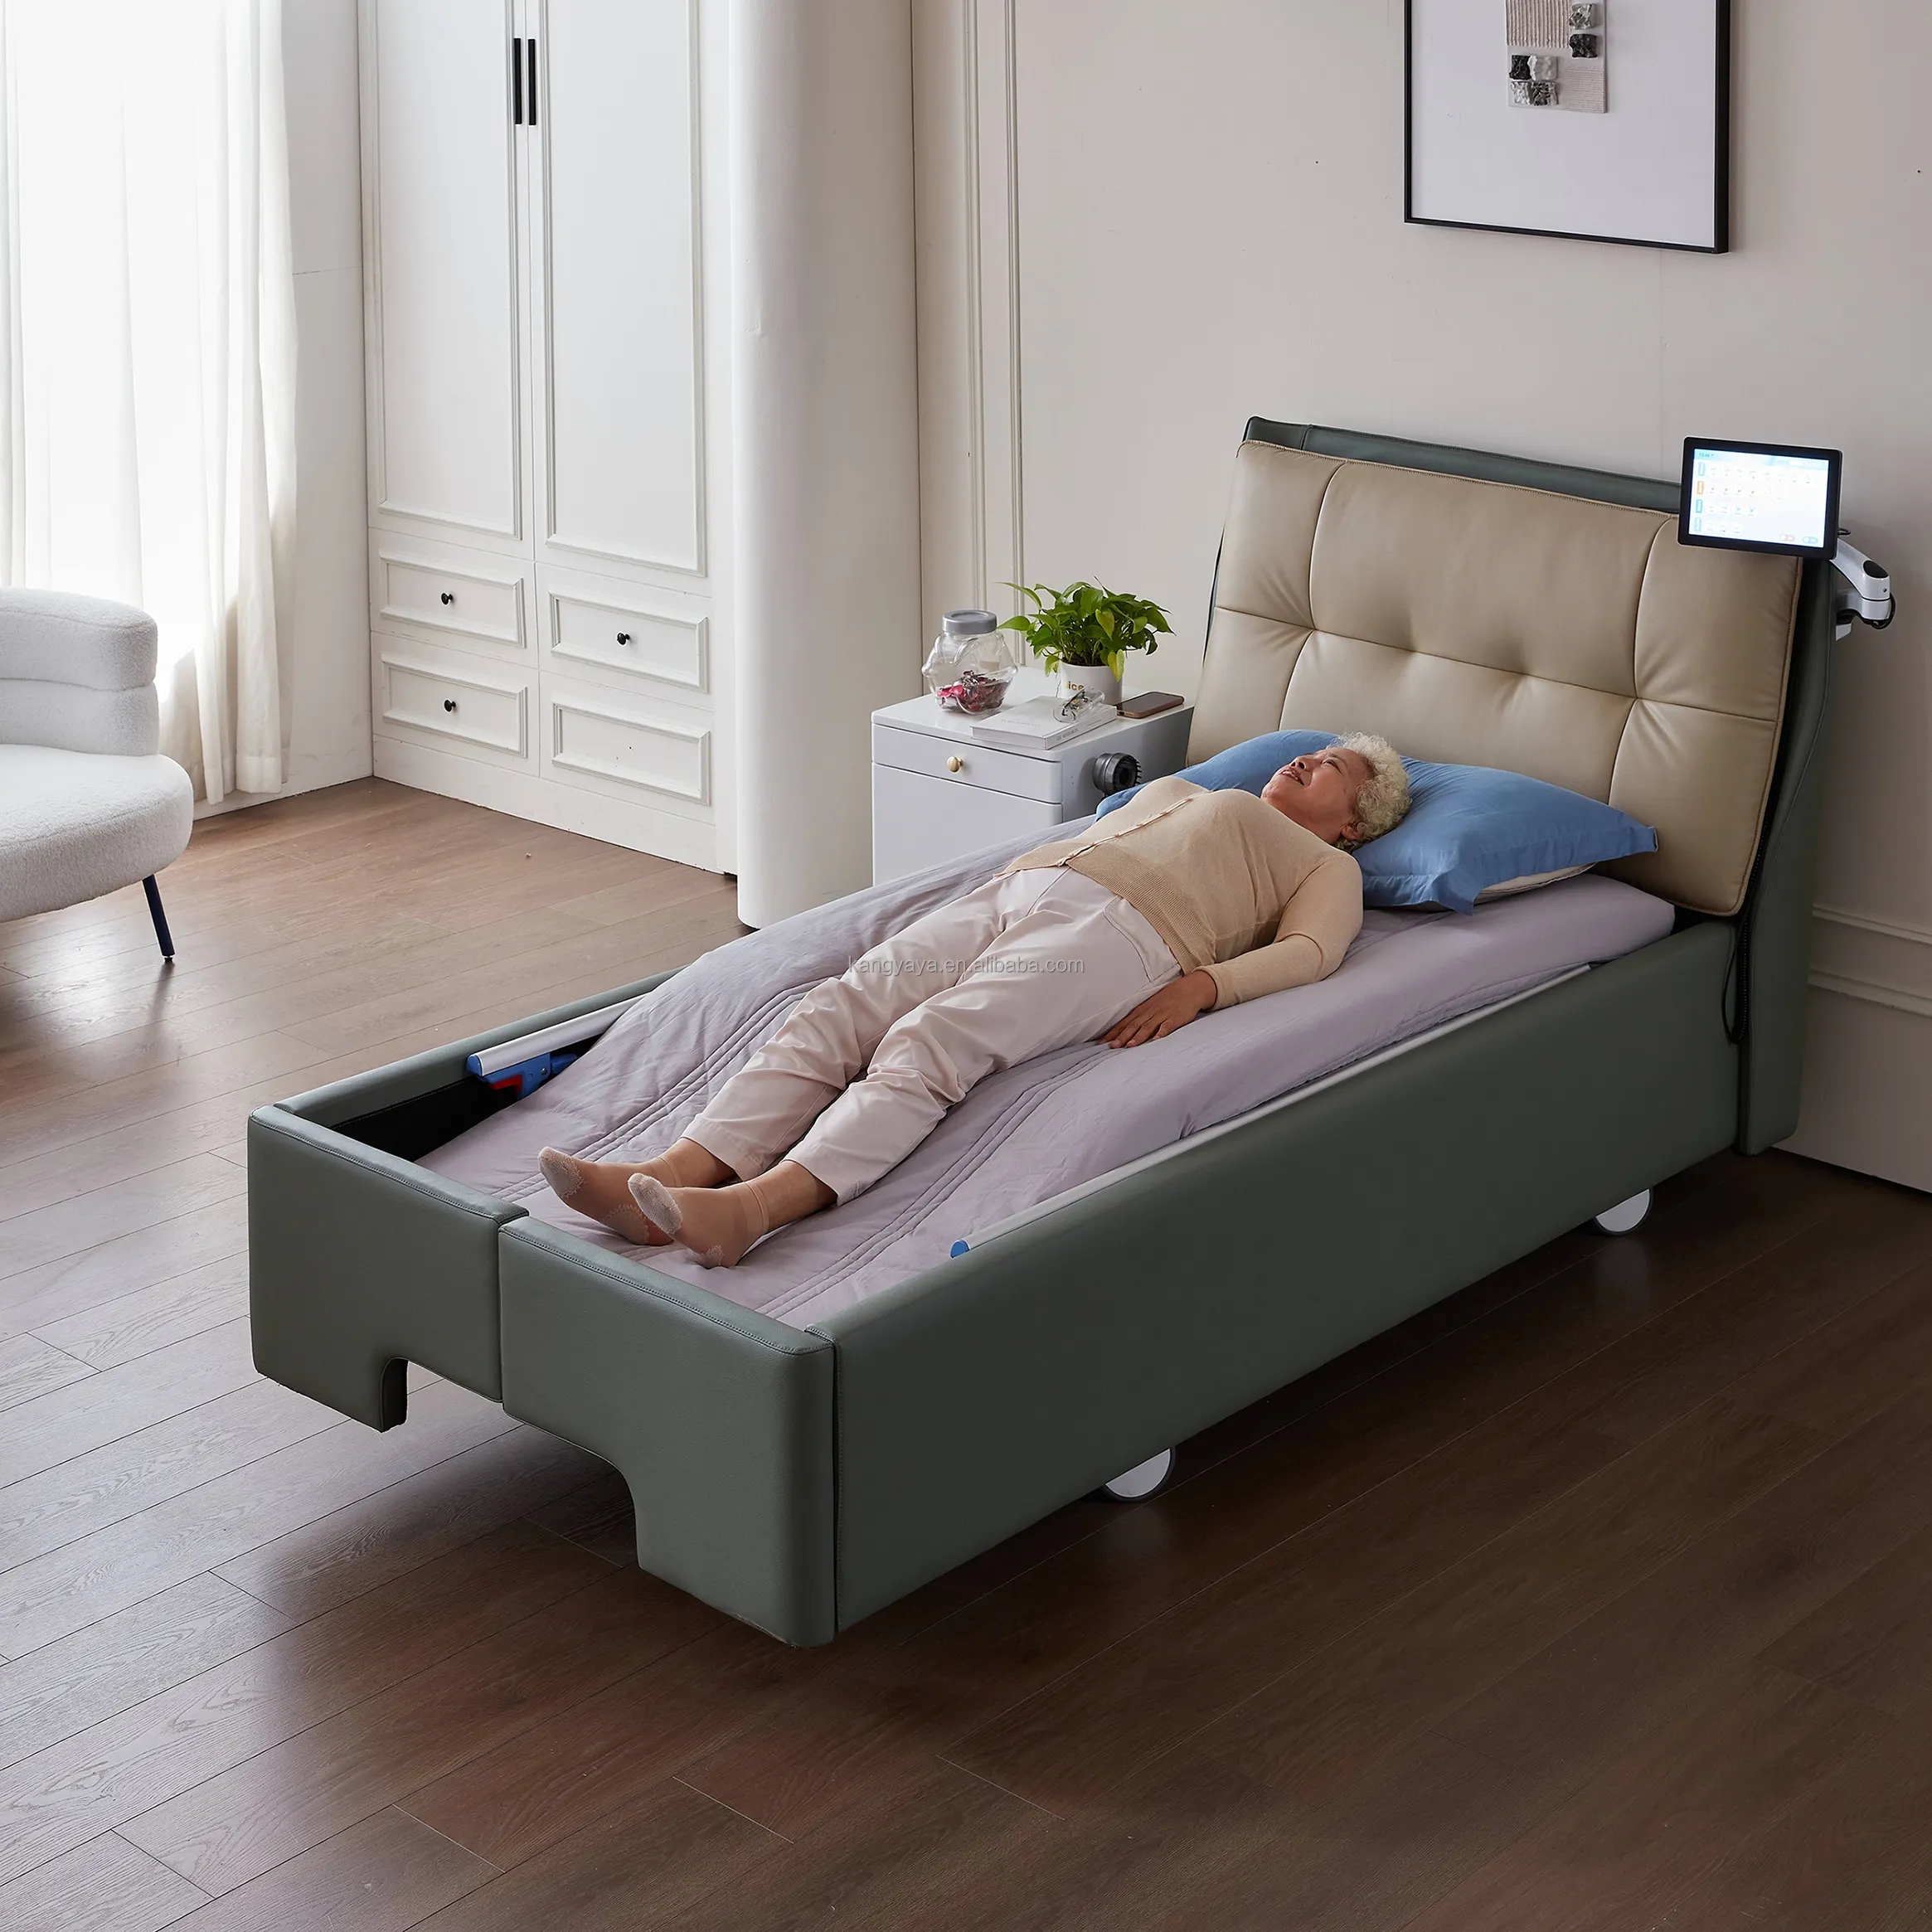 Intelligent nursing bed providing automatic leg lowering and lifting functions for elderly care to use at home